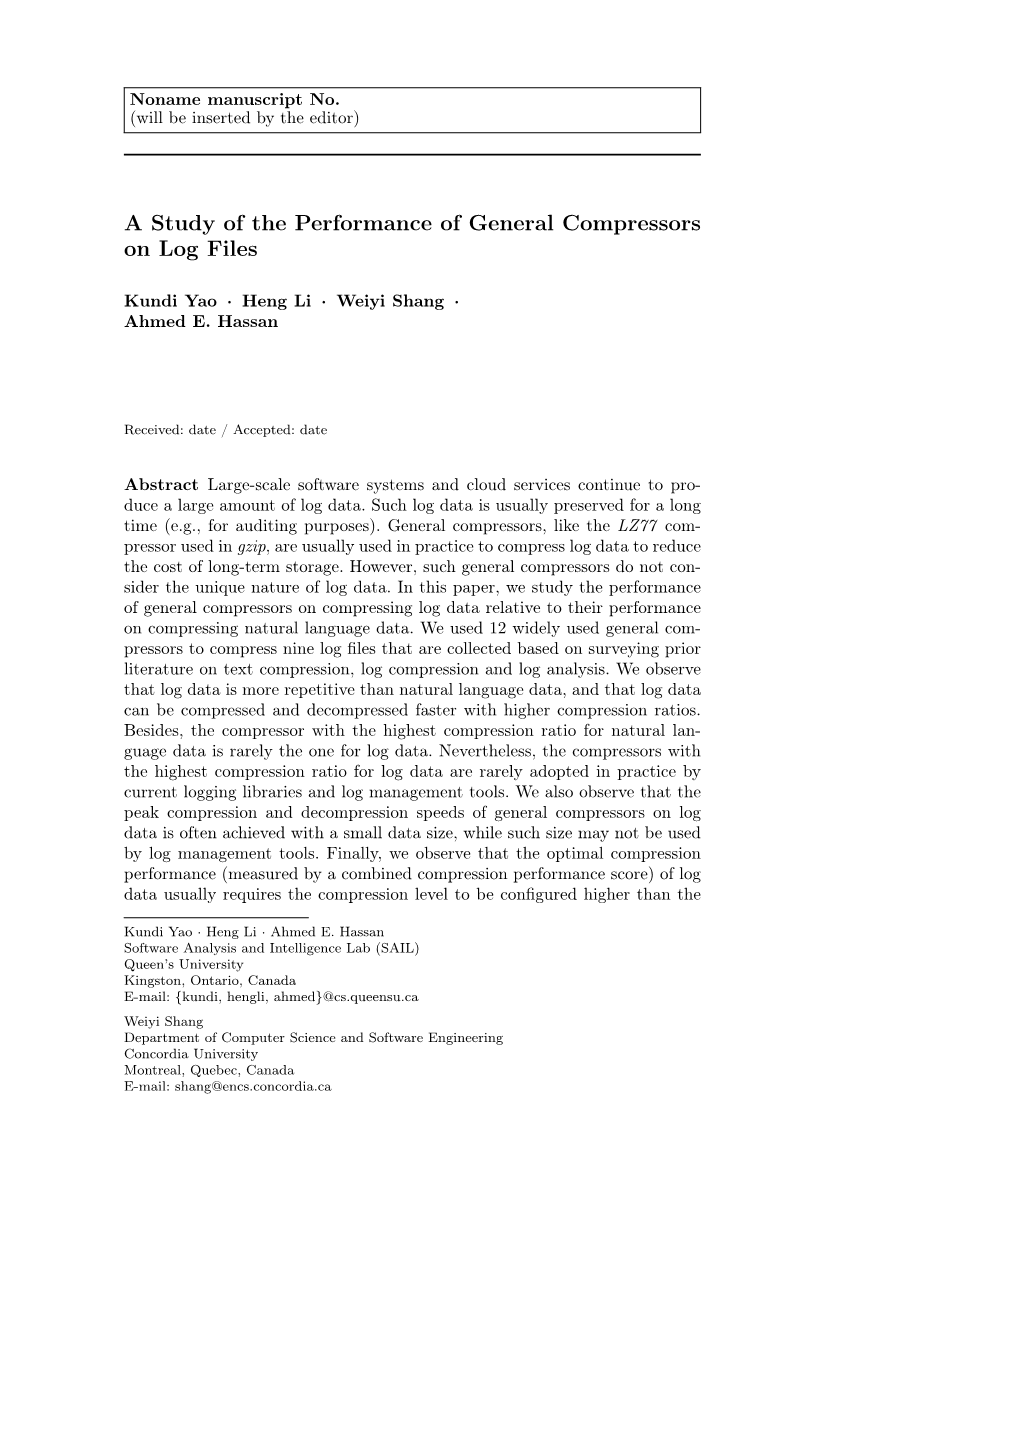 A Study of the Performance of General Compressors on Log Files